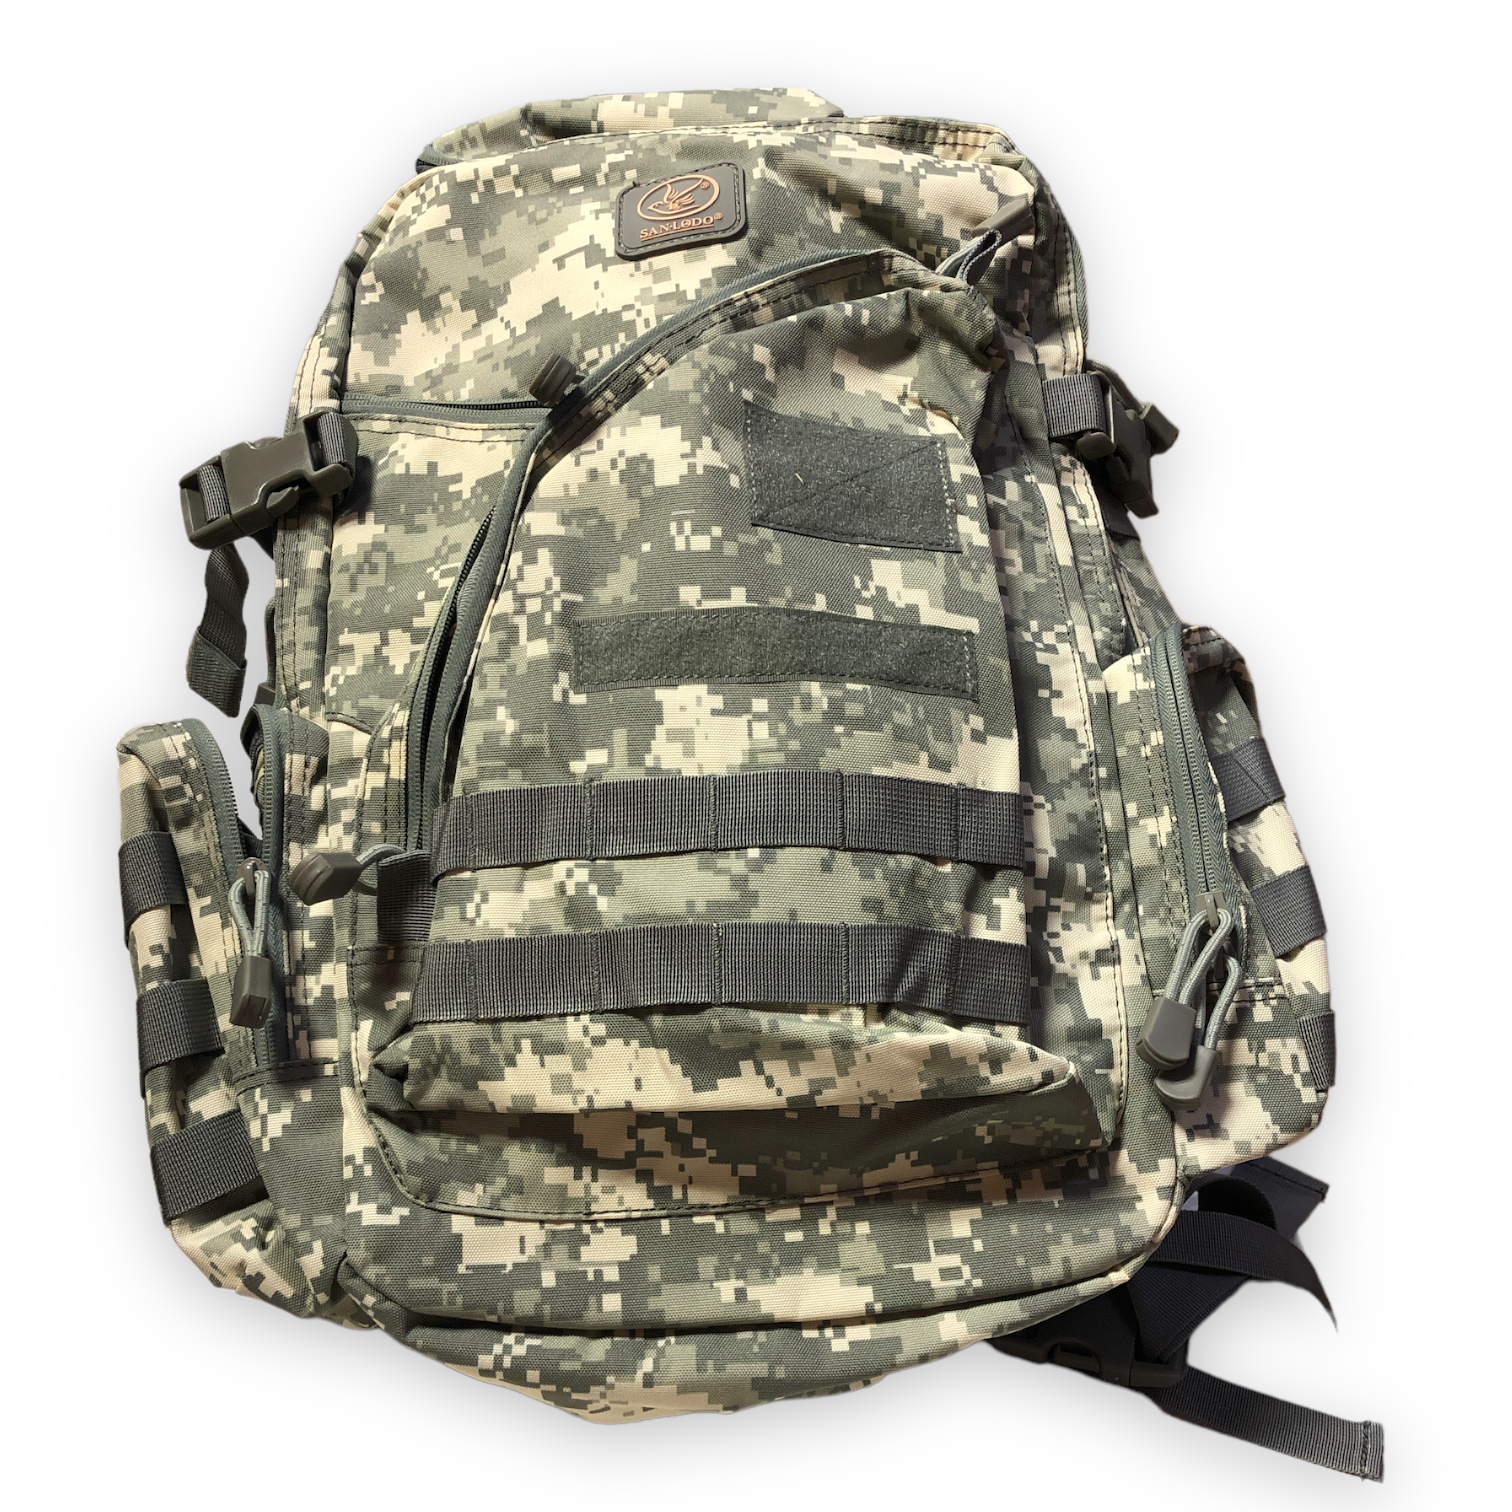 Travel Smart Tactical Backpacks with Chest & Waist Straps